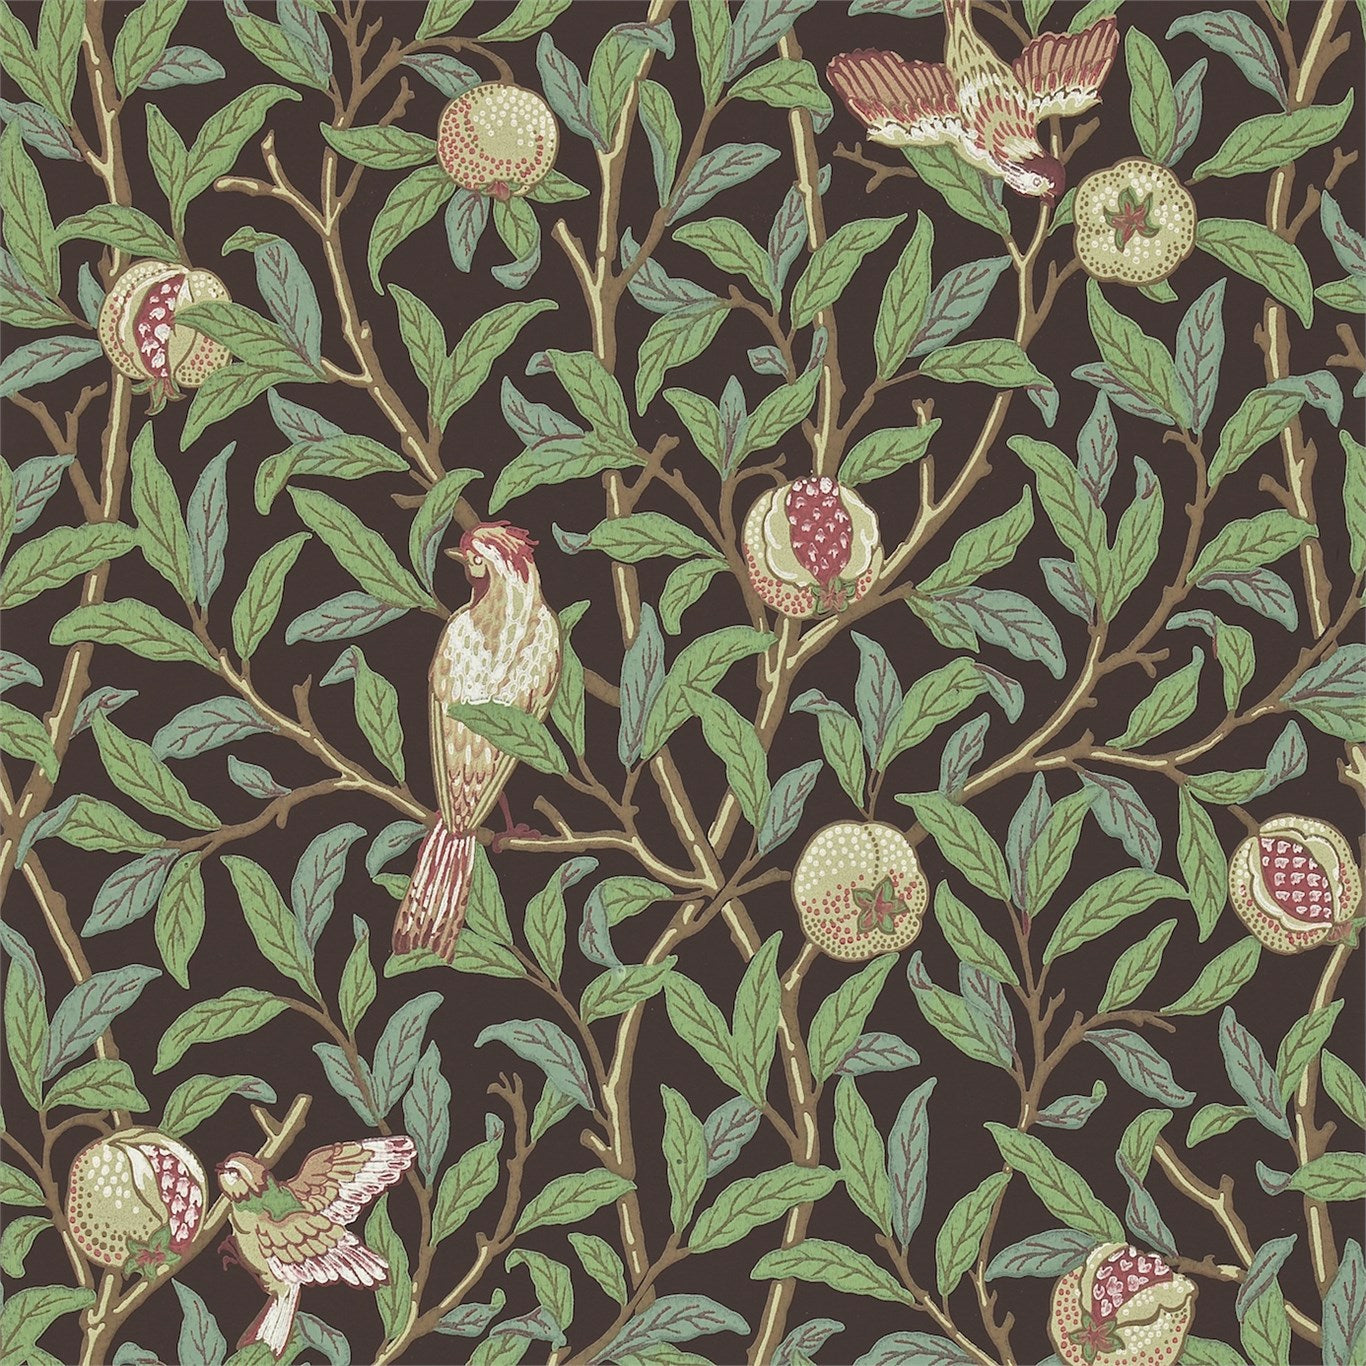 Bird & Pomegranate Charcoal/Sage Wallpaper DARW212537 by Morris & Co